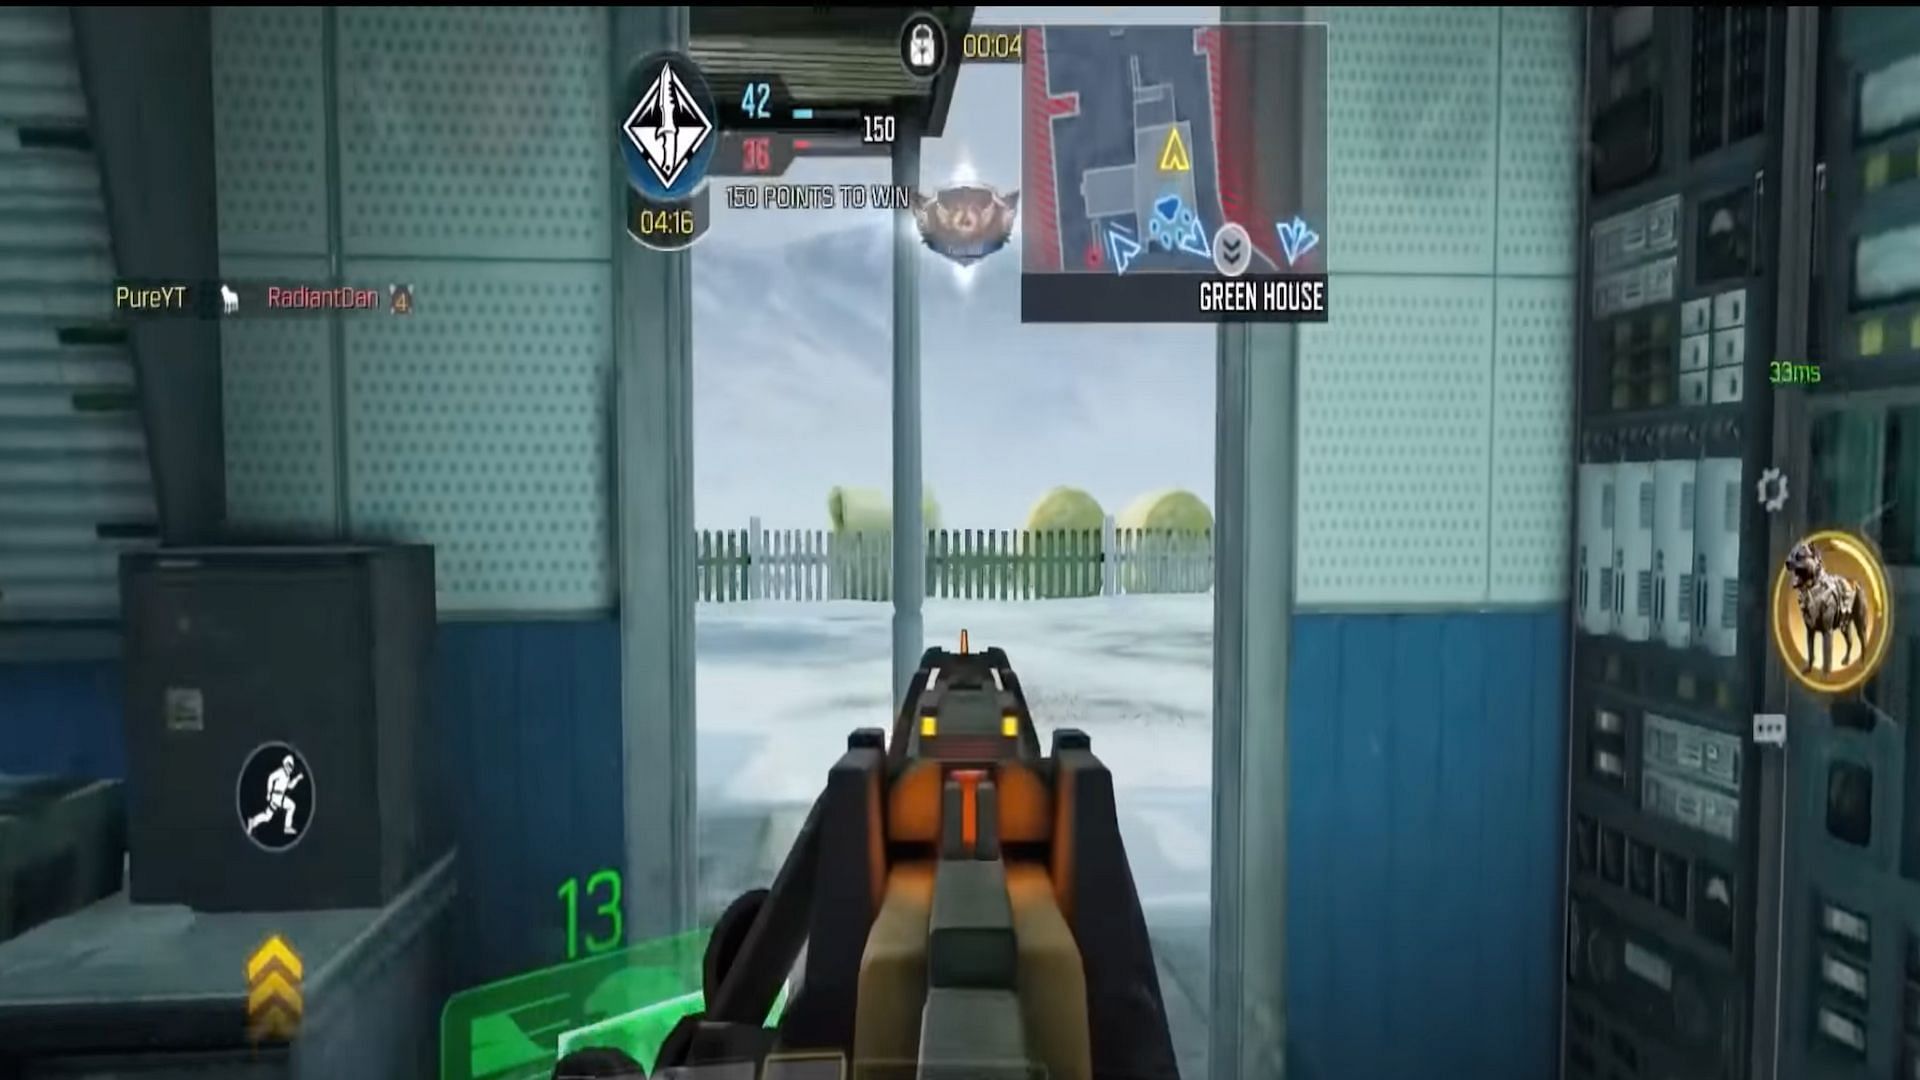 Players of Call of Duty: Mobile can add powerful legendary weapons to their lineup (Image via YouTube/Pure)